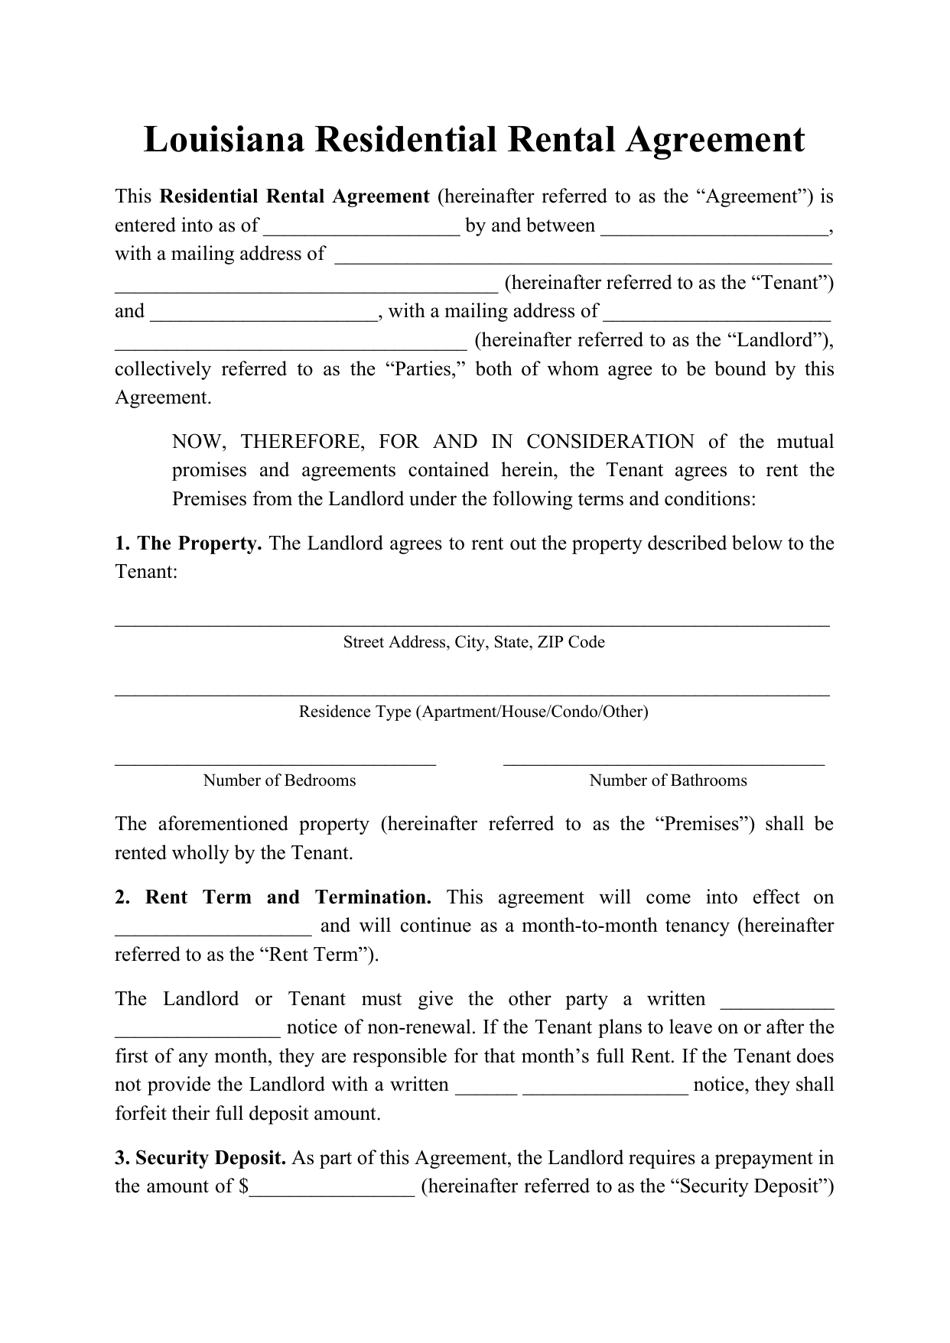 Louisiana Residential Rental Agreement Template Fill Out Sign Online